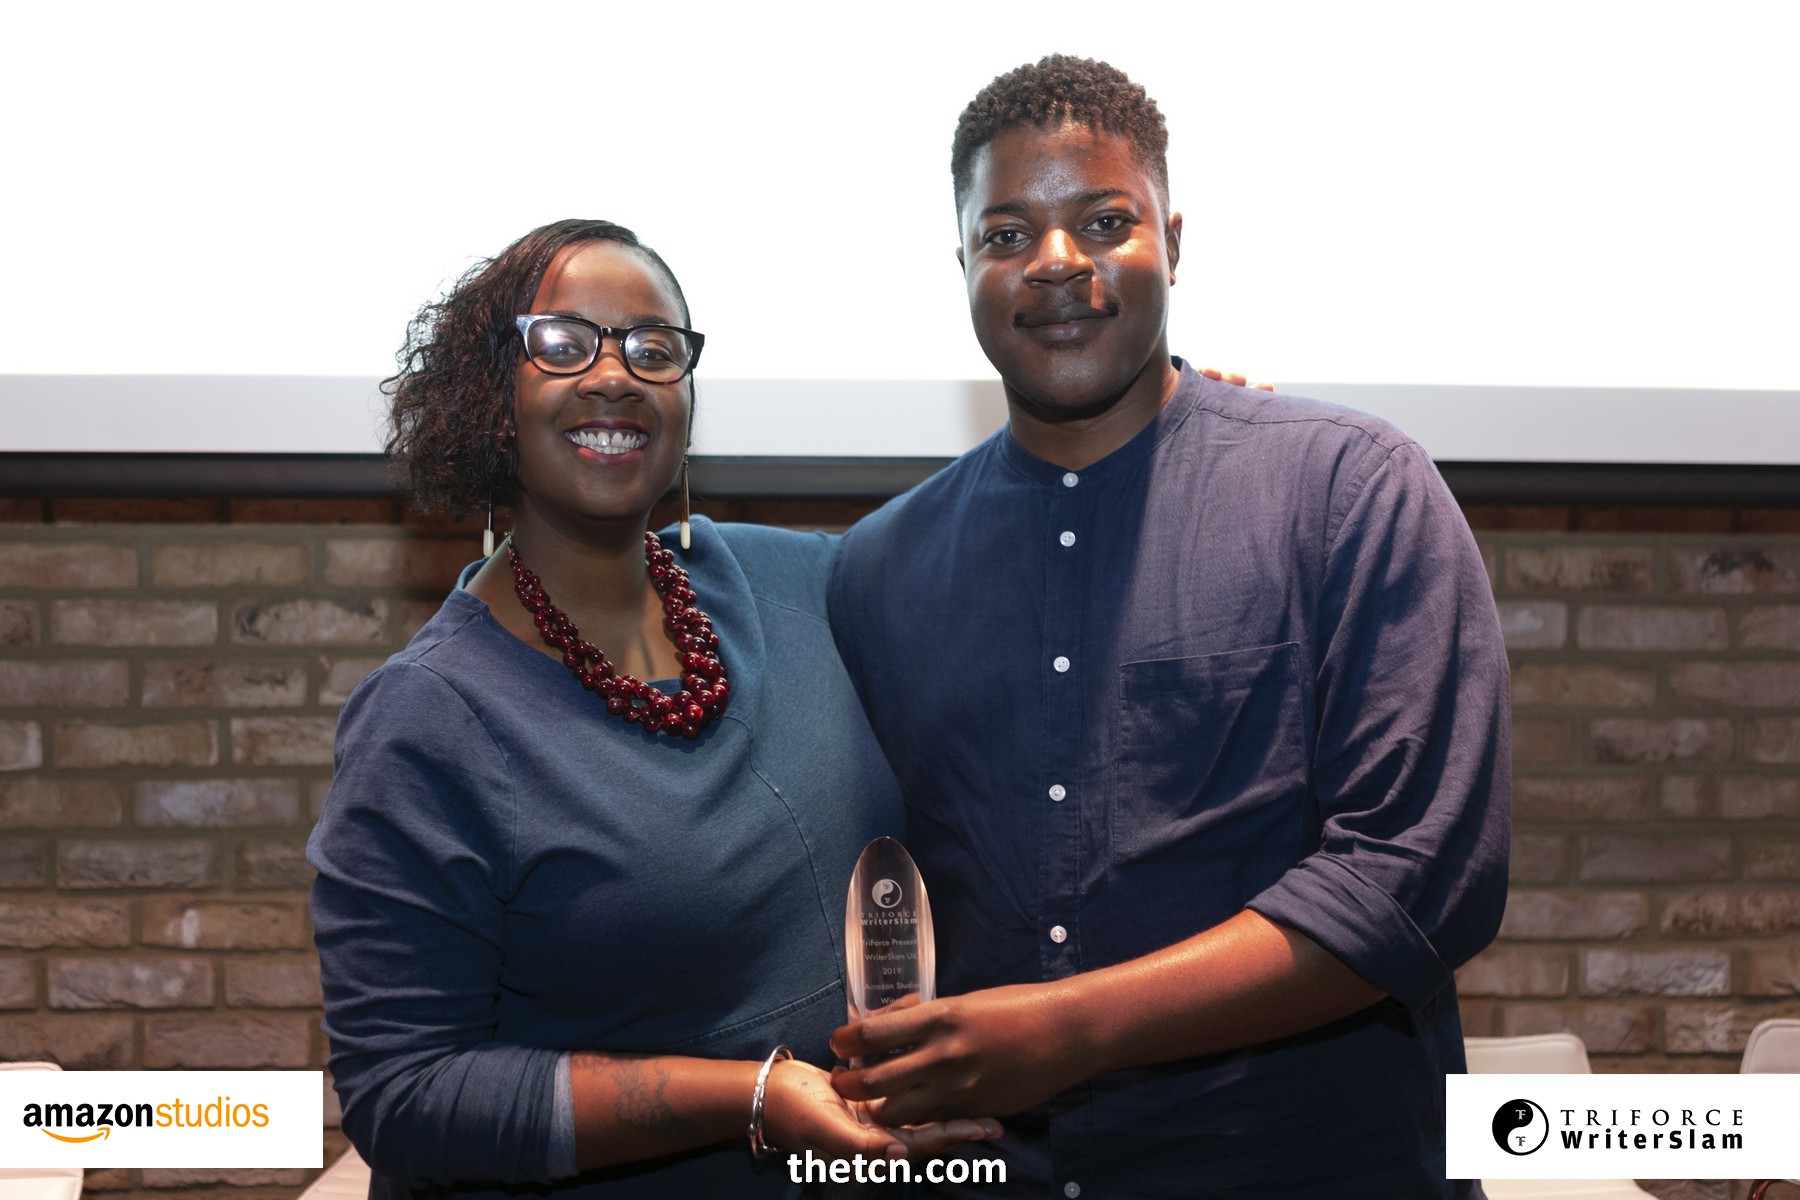 #WriterSlam 2019 with Amazon Studios! What a fantastic evening, with not one, but two winners! Congrats Celia Morgan and Omari McCarthy. Make sure you don’t miss out on our next WriterSlam opportunity and sign up to our mailing list here to be kept up to date: http://triforcepromotions.us3.list-manage2.com/subscribe?u=ec1692306ae5525449ed0309b&id=323793f2d4